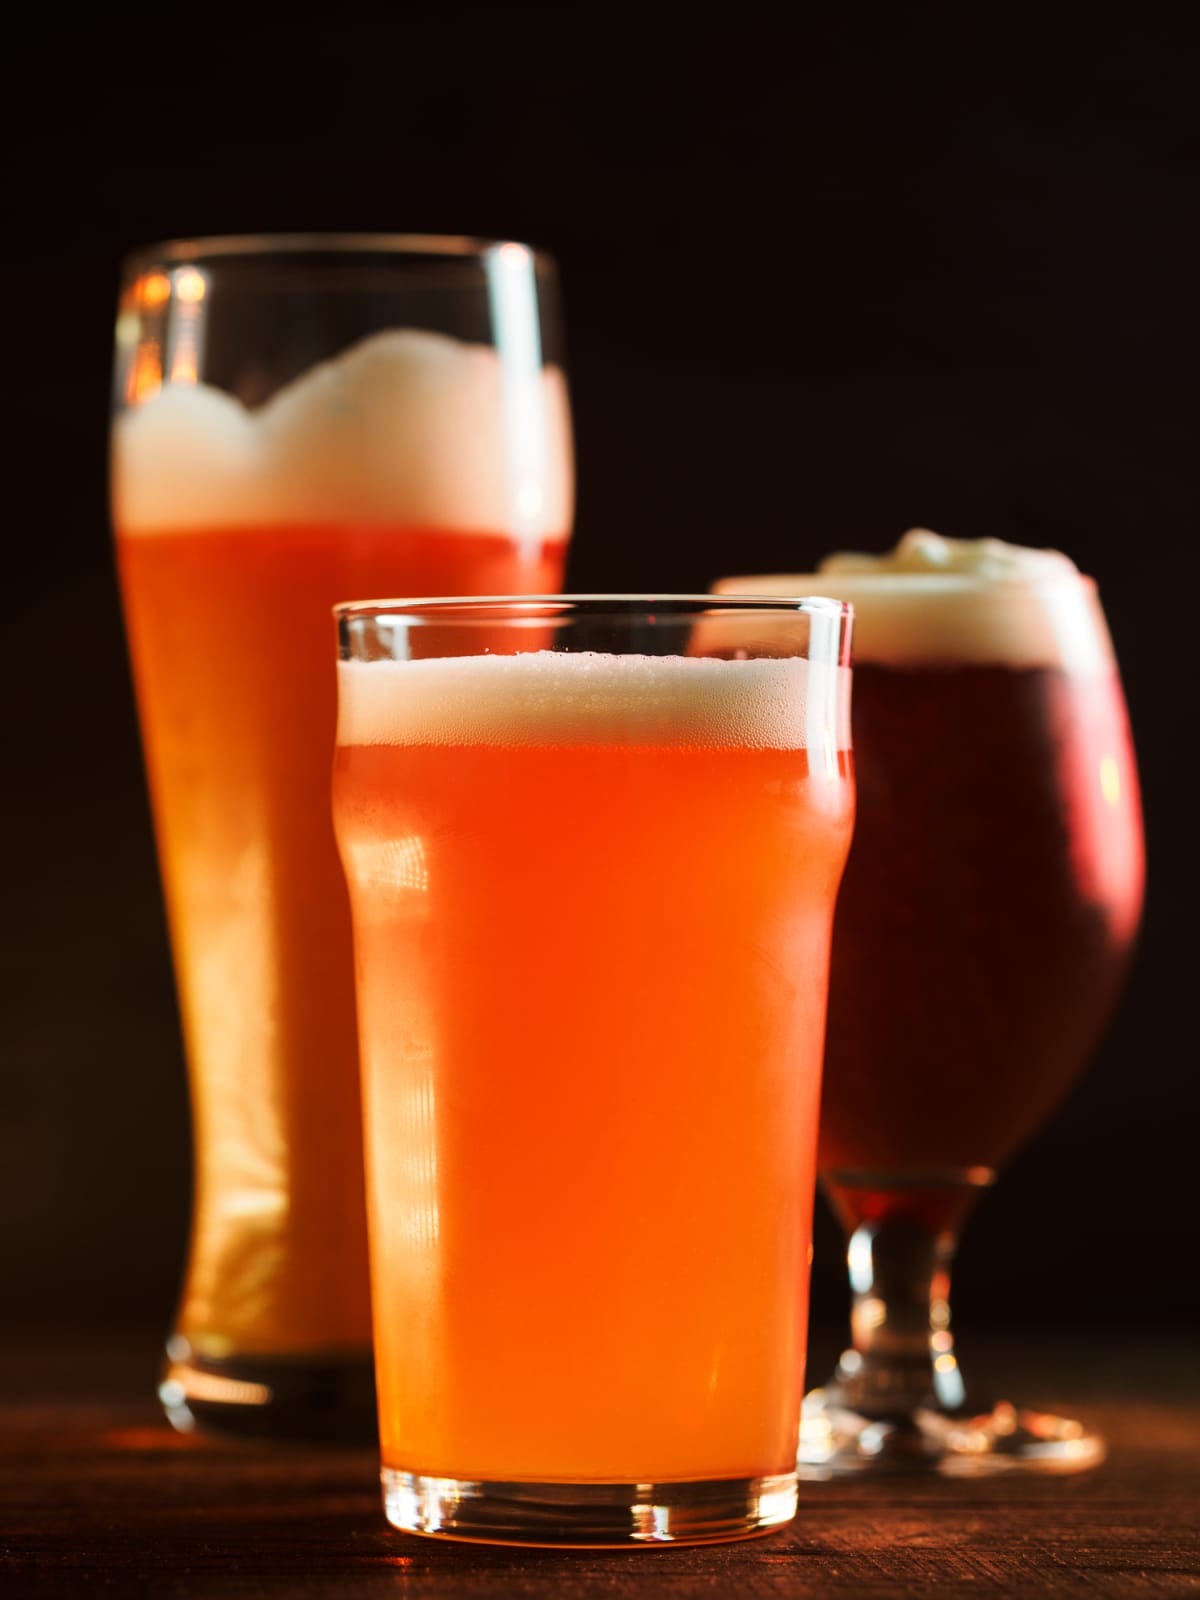 Beer and wine glass shadows against orange background